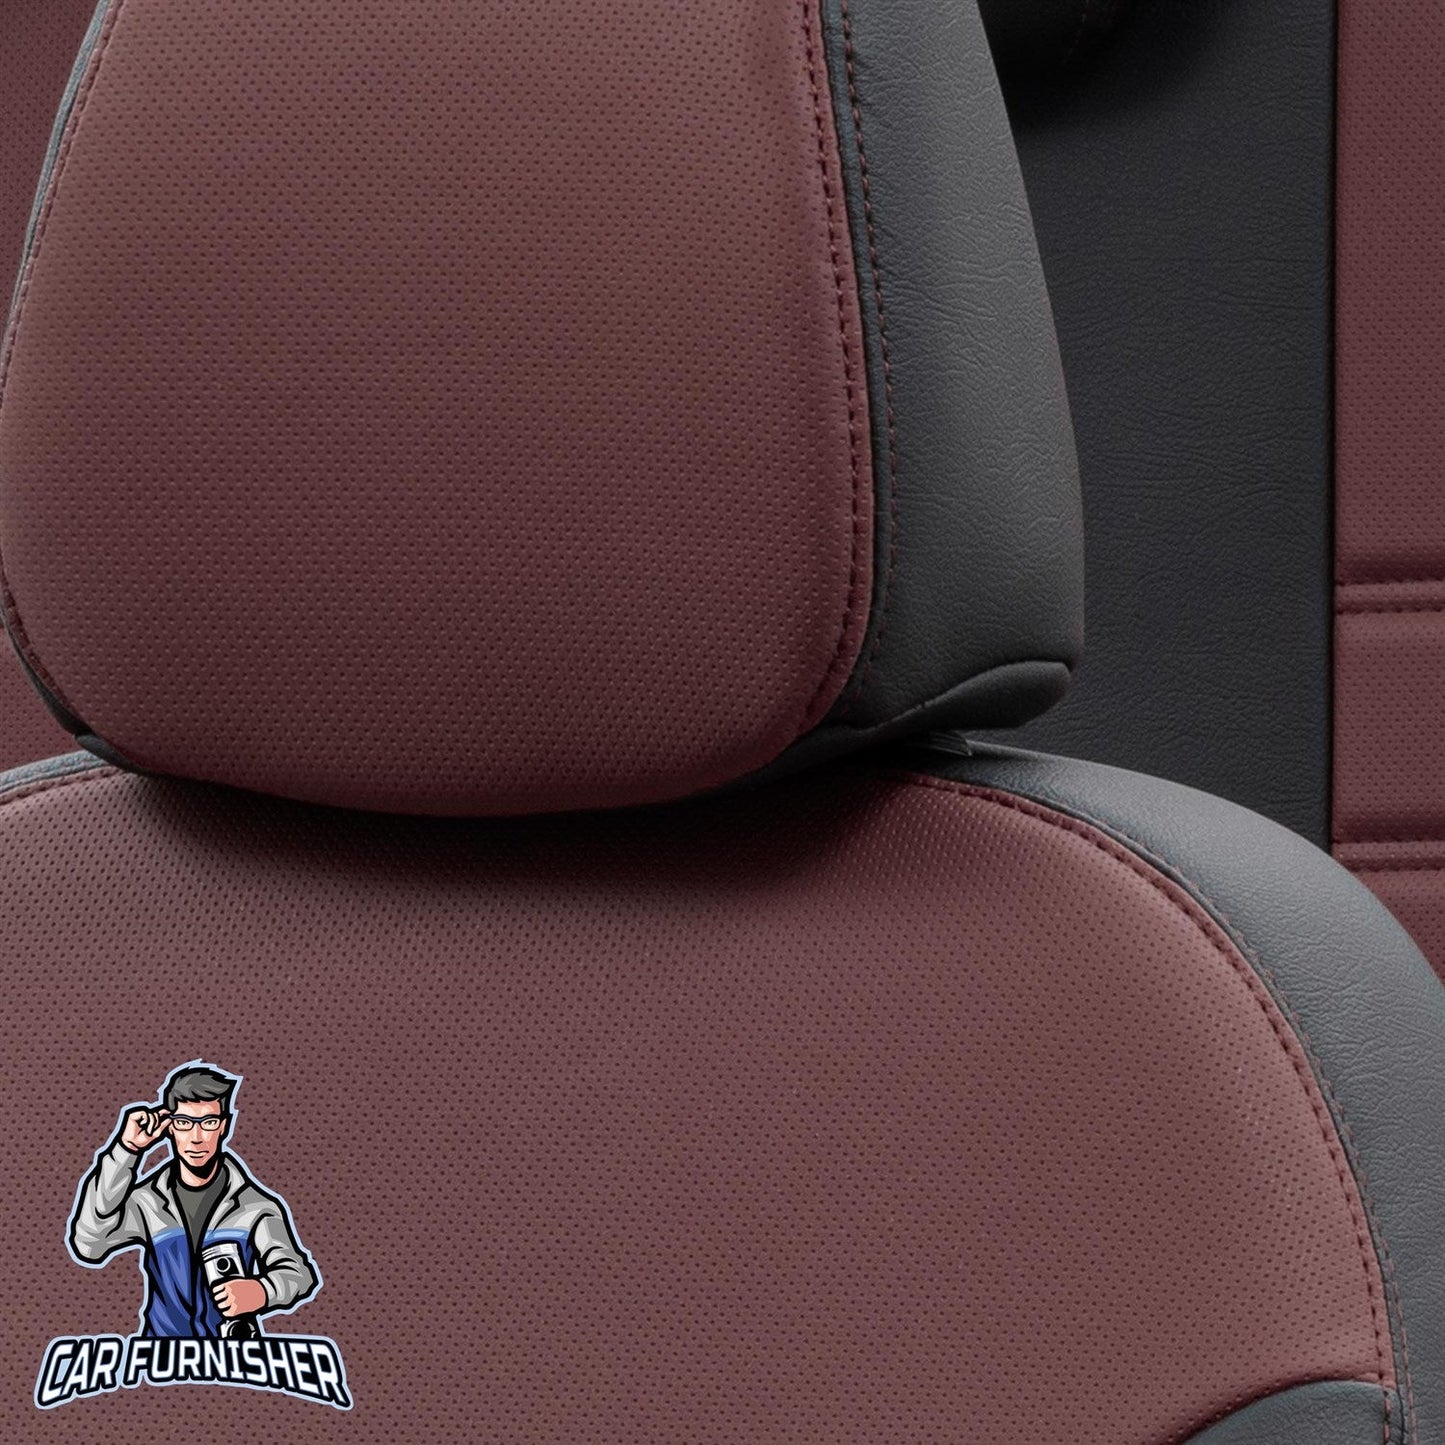 Jeep Grand Cherokee Seat Cover Istanbul Leather Design Burgundy Leather